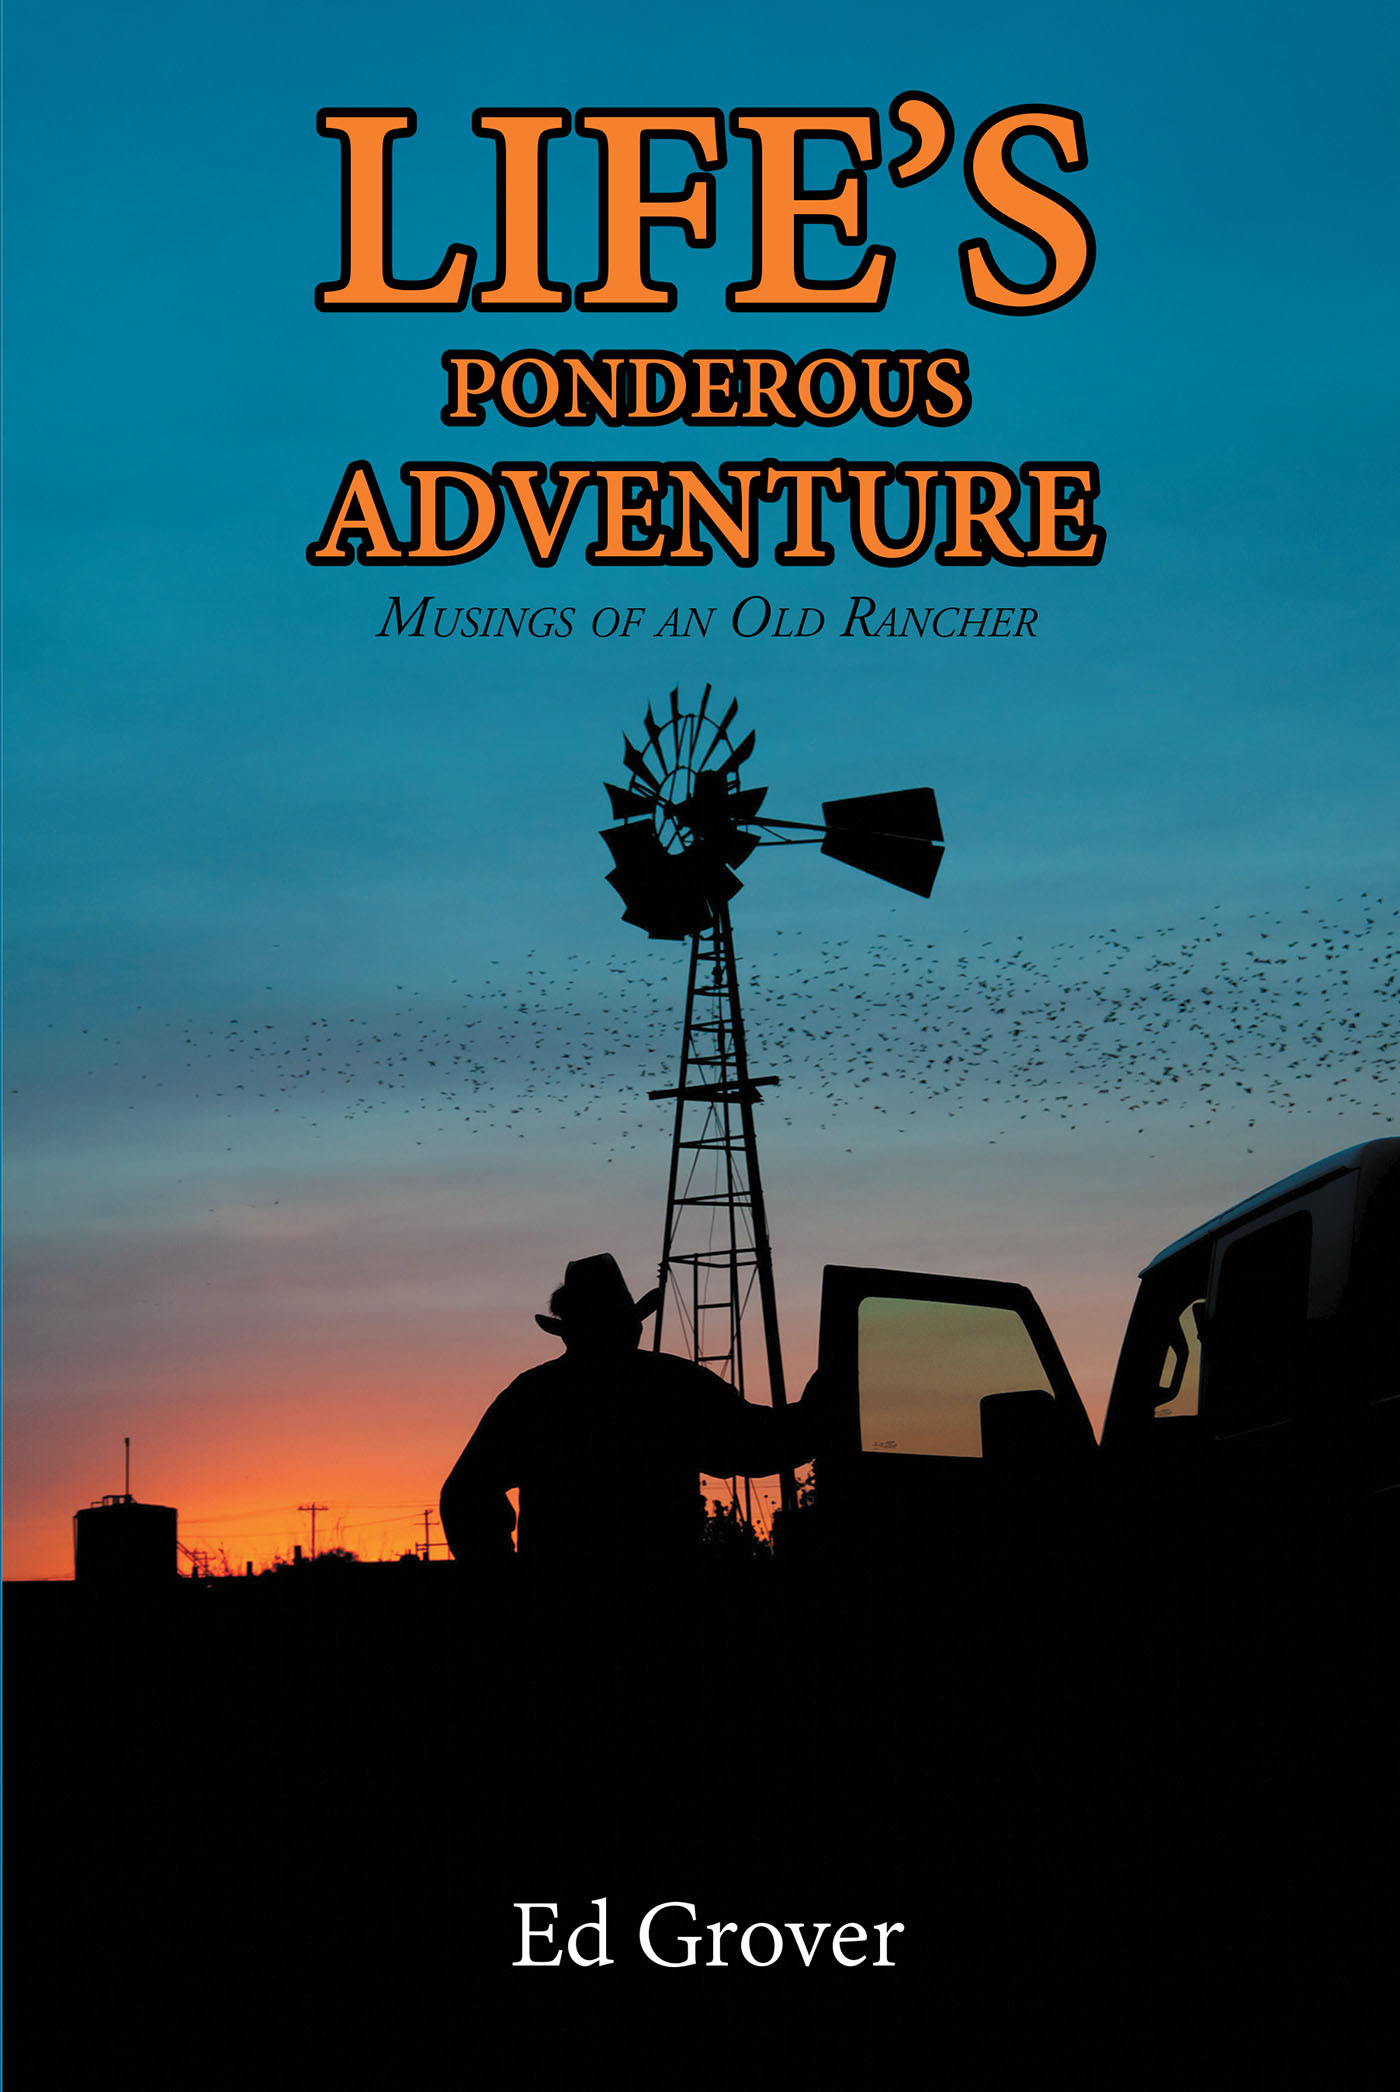 Author Ed Grover’s New Book, "Life's Ponderous Adventure: Musings of an Old Rancher," is a Collection of Poetry and Ruminations Written by the Author Over Many Years